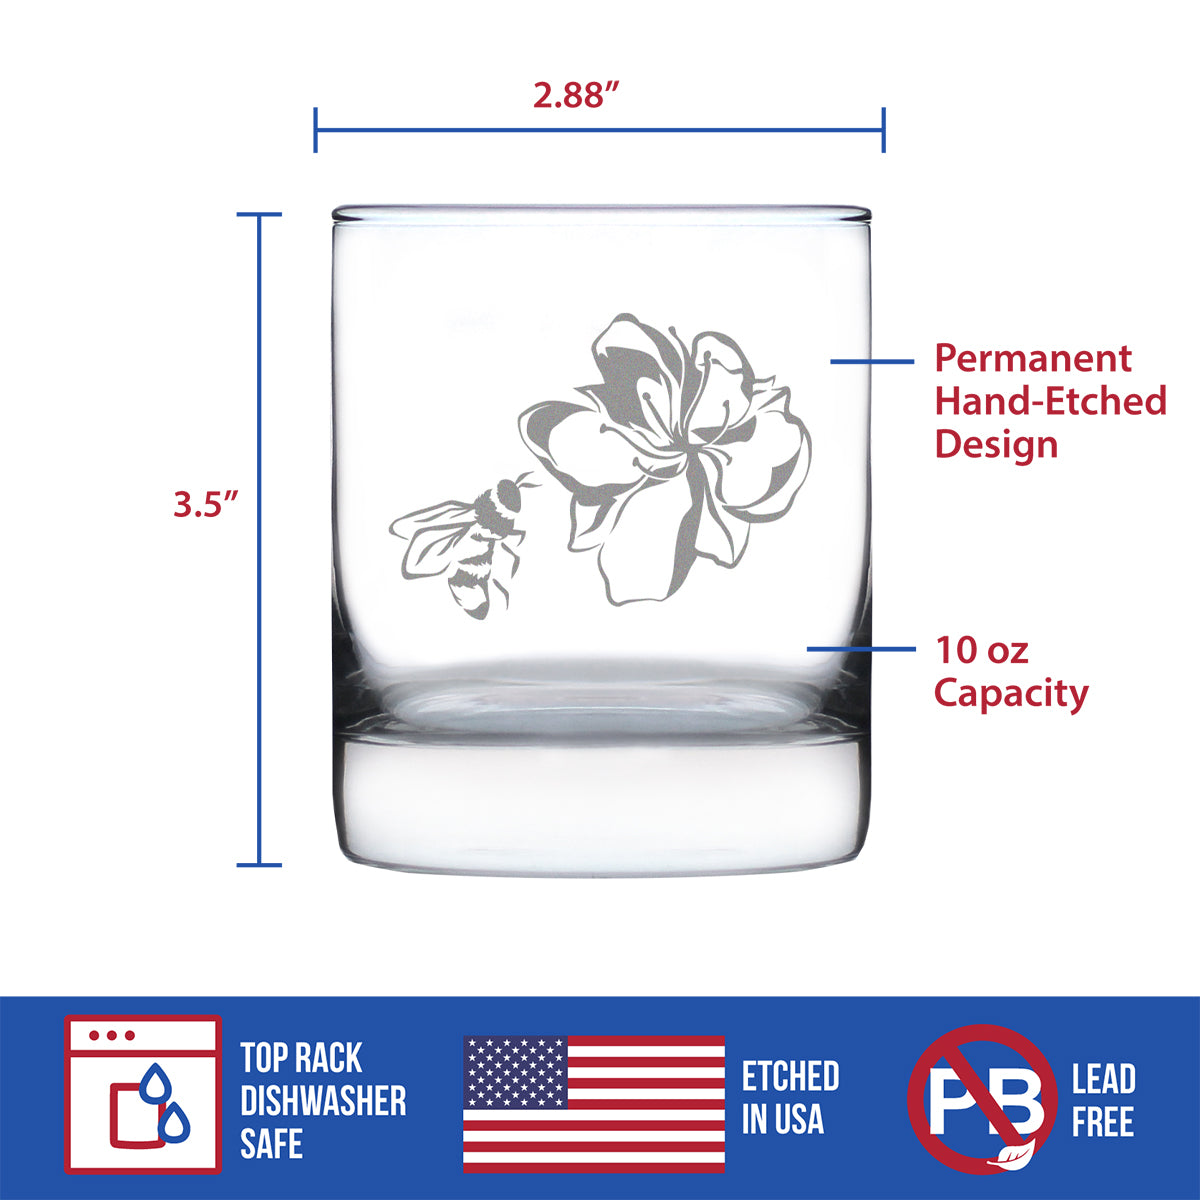 Bee Flower - Whiskey Rocks Glass - Cute Gifts for Bumblebee &amp; Nature Lovers - 10.25 Oz